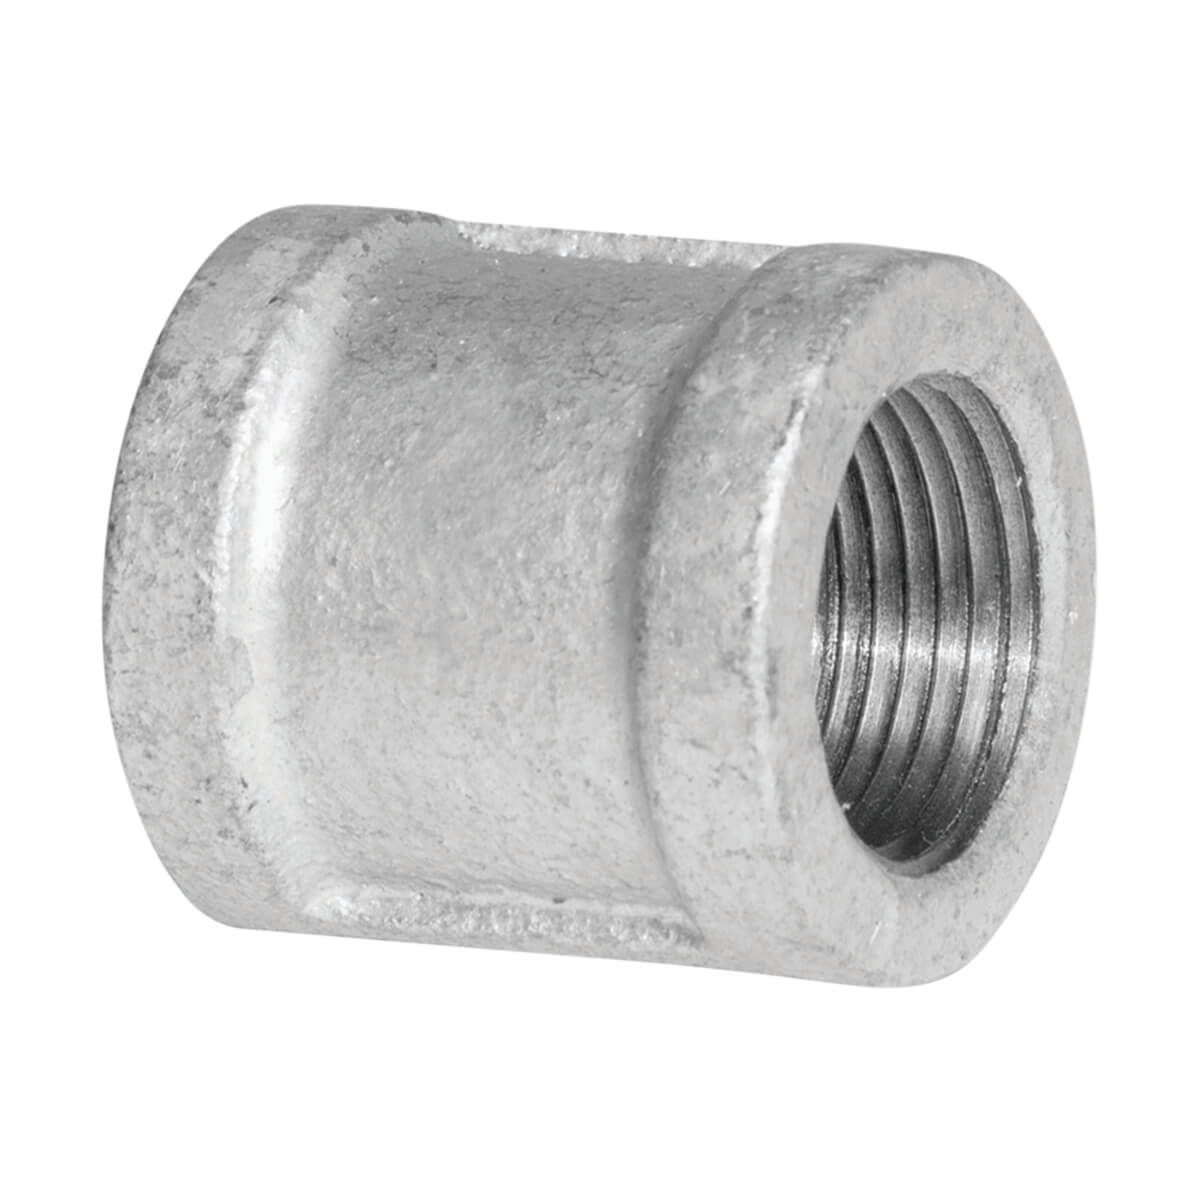 Fitting Galvanized Iron Coupling - 1/8-in